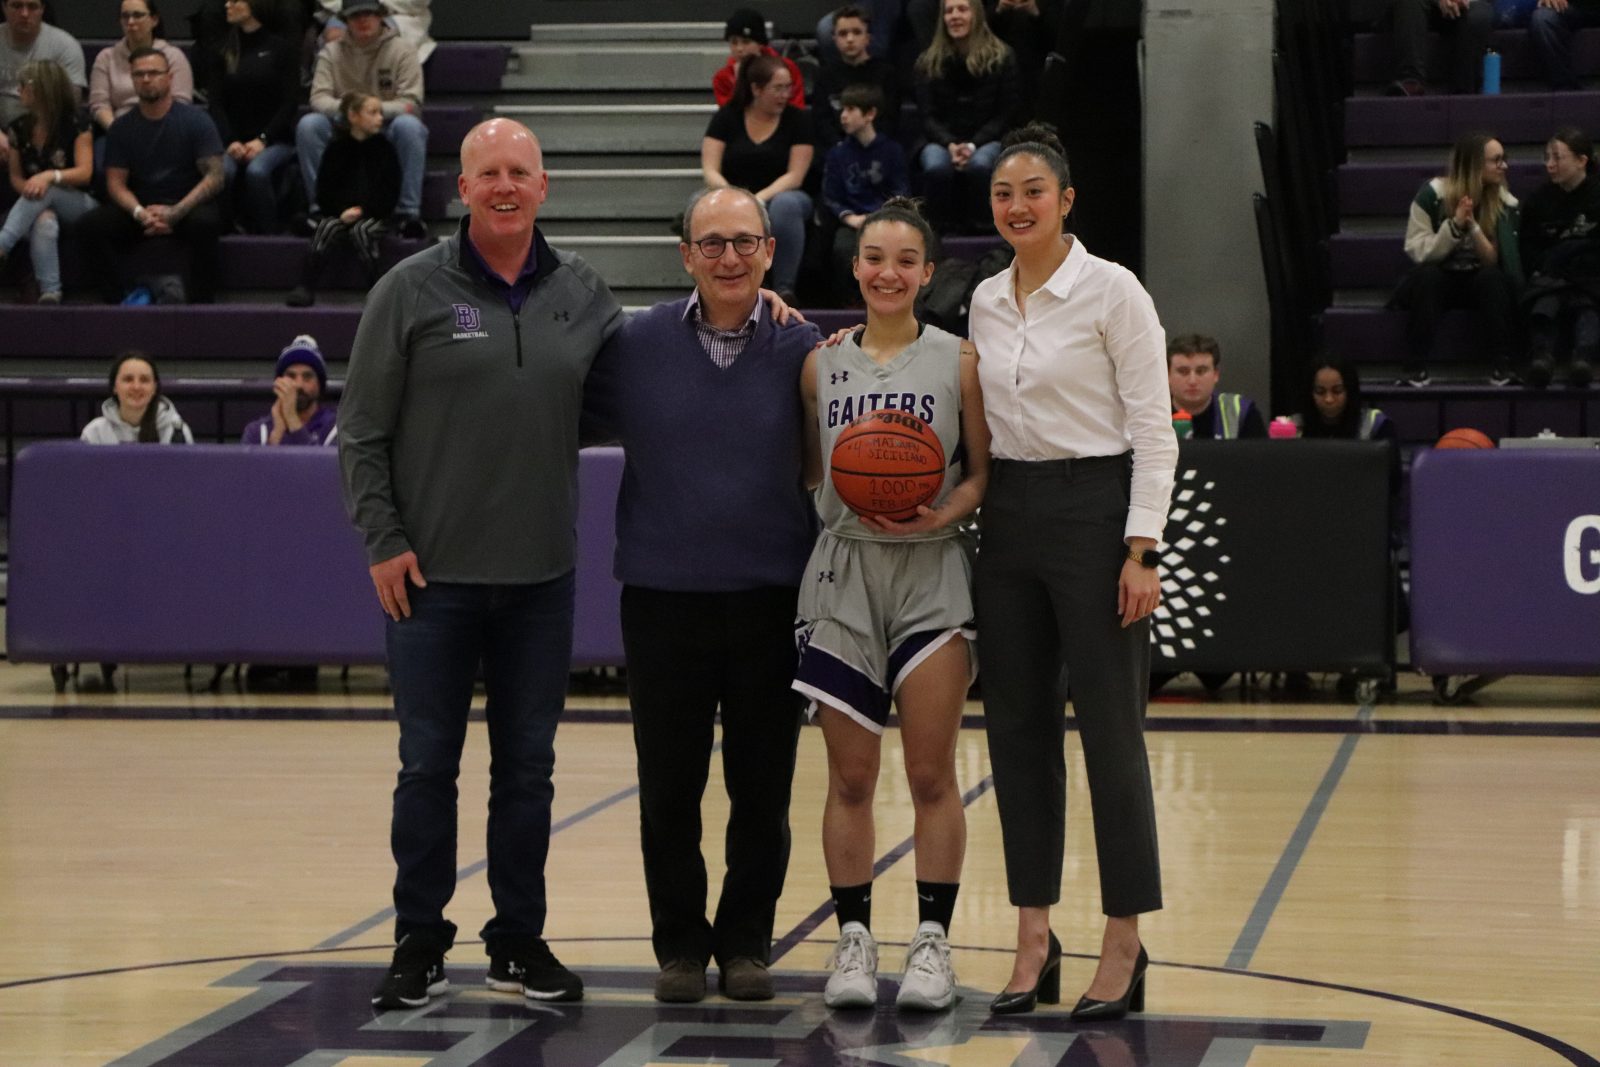 Siciliano becomes fastest player in RSEQ history to reach 1,000 career points